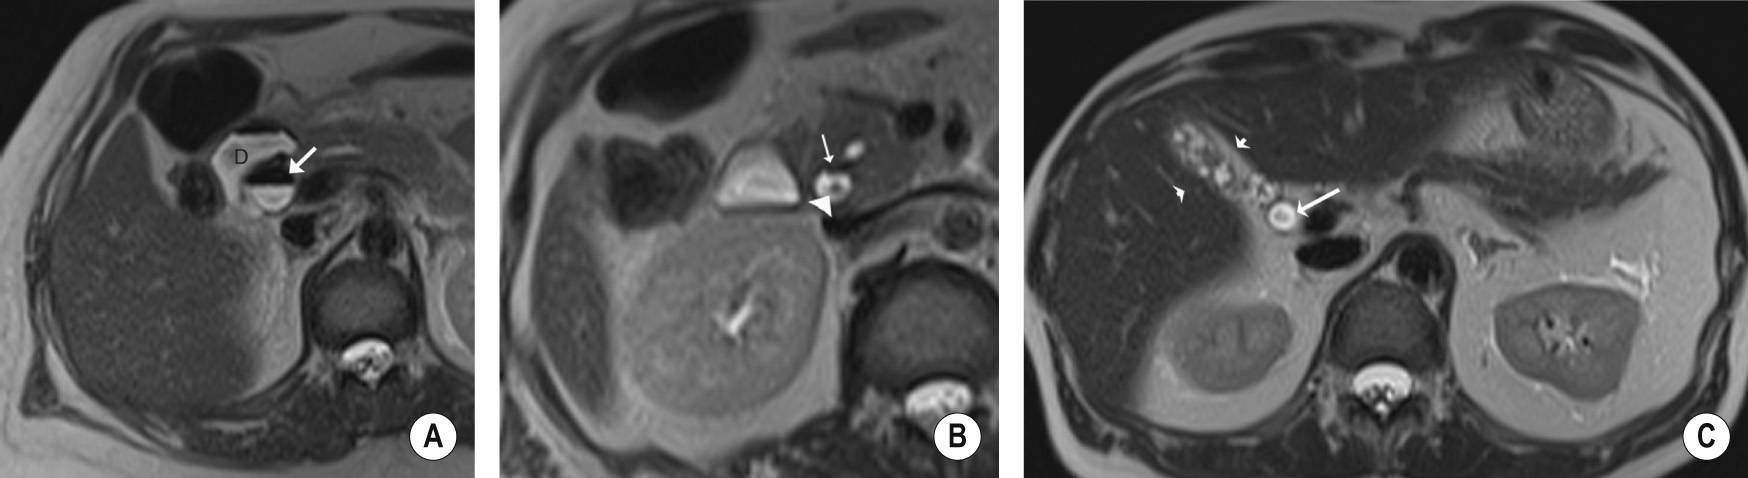 Example of intraductal factors causing potential pitfalls in interpretation. (A) Axial T2-weighted MRI shows an air-fluid level in a dilated proximal CBD in keeping with aerobilia (arrow), adjacent to the duodenum (D), which also shows an air-fluid level. (B) More distally in the same patient, the cause of the obstruction is seen with a dependent filling defect (arrowhead) in the distal CBD in keeping with a stone. This should not be confused with the non-dependent aerobilia also shown at this level (arrow). (C) Axial T2-weighted MRI in a different patient shows a central filling defect in a dilated CBD which is due to flow artefact (arrow). The patient also has chronic cholecystitis with a contracted gallbladder (arrowheads).